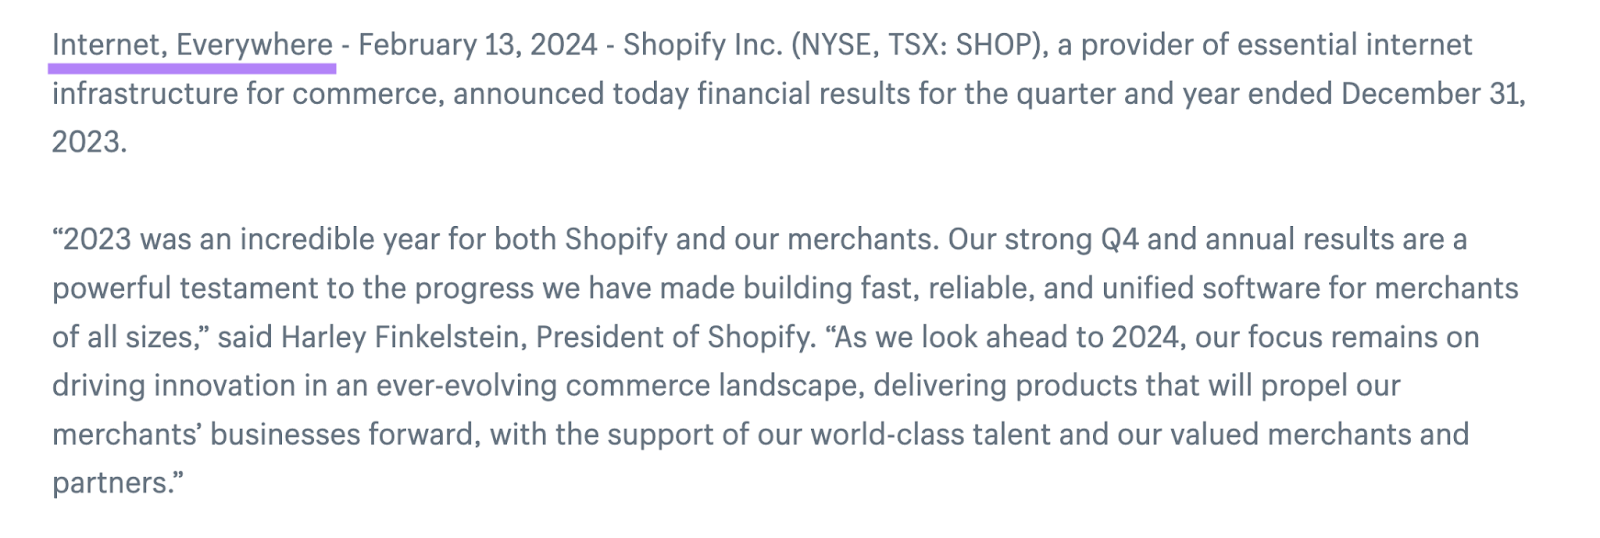 “Internet, Everywhere” set as the location of Shopify's press release